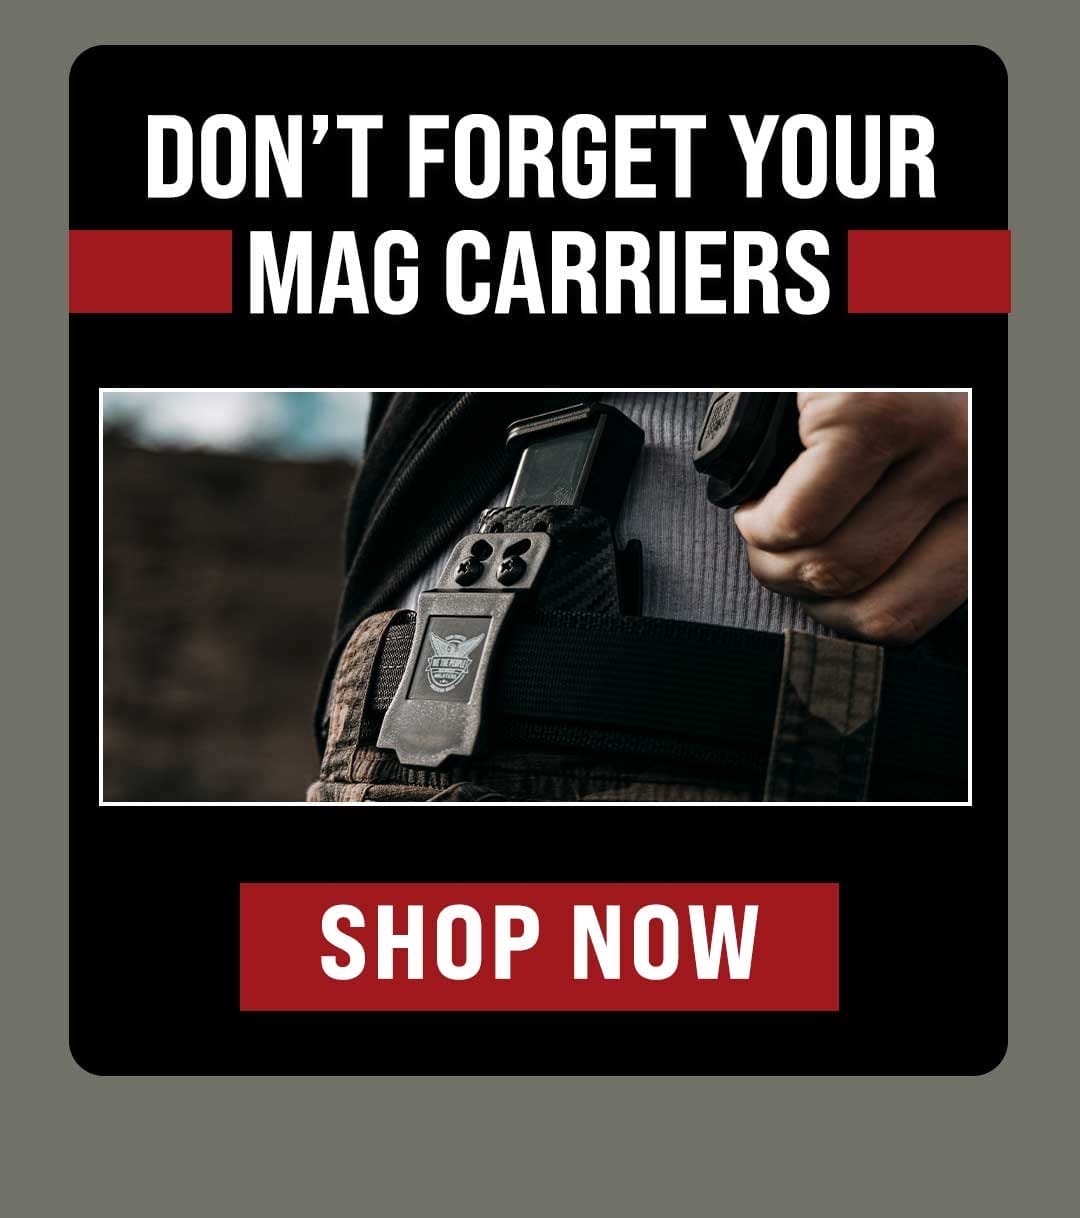 Pair them with a set of Mag Carriers